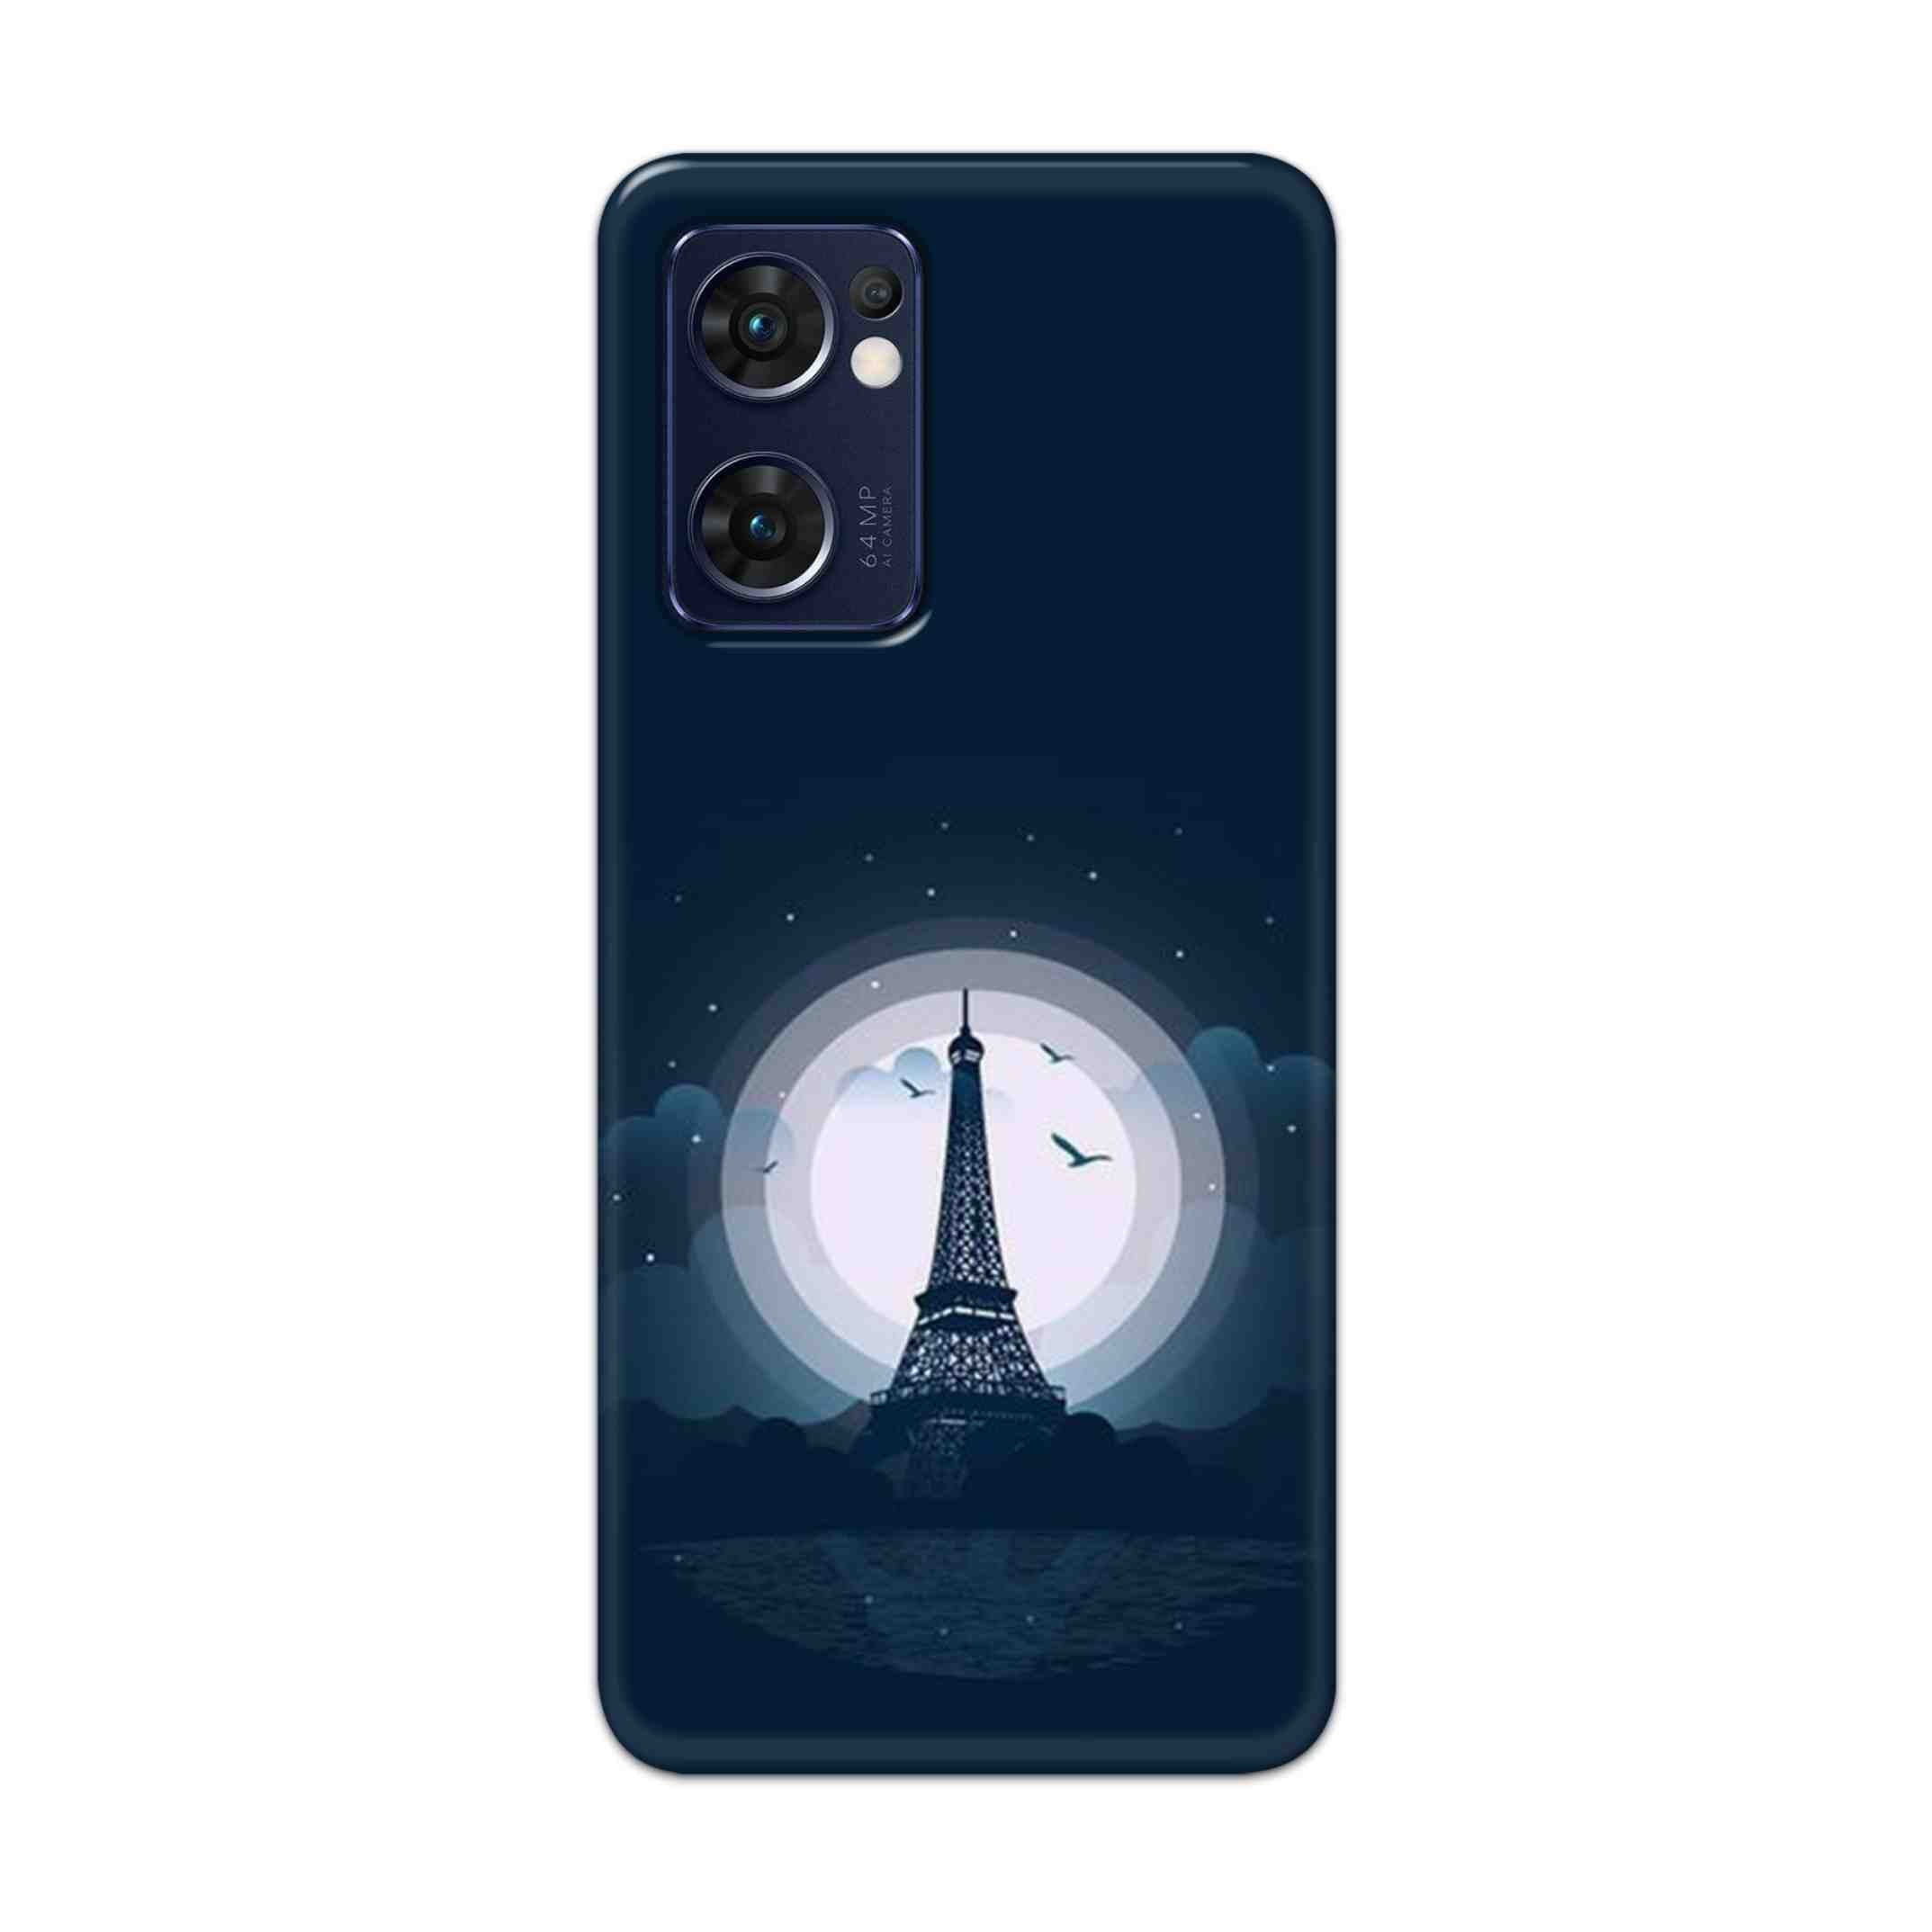 Buy Paris Eiffel Tower Hard Back Mobile Phone Case Cover For Reno 7 5G Online